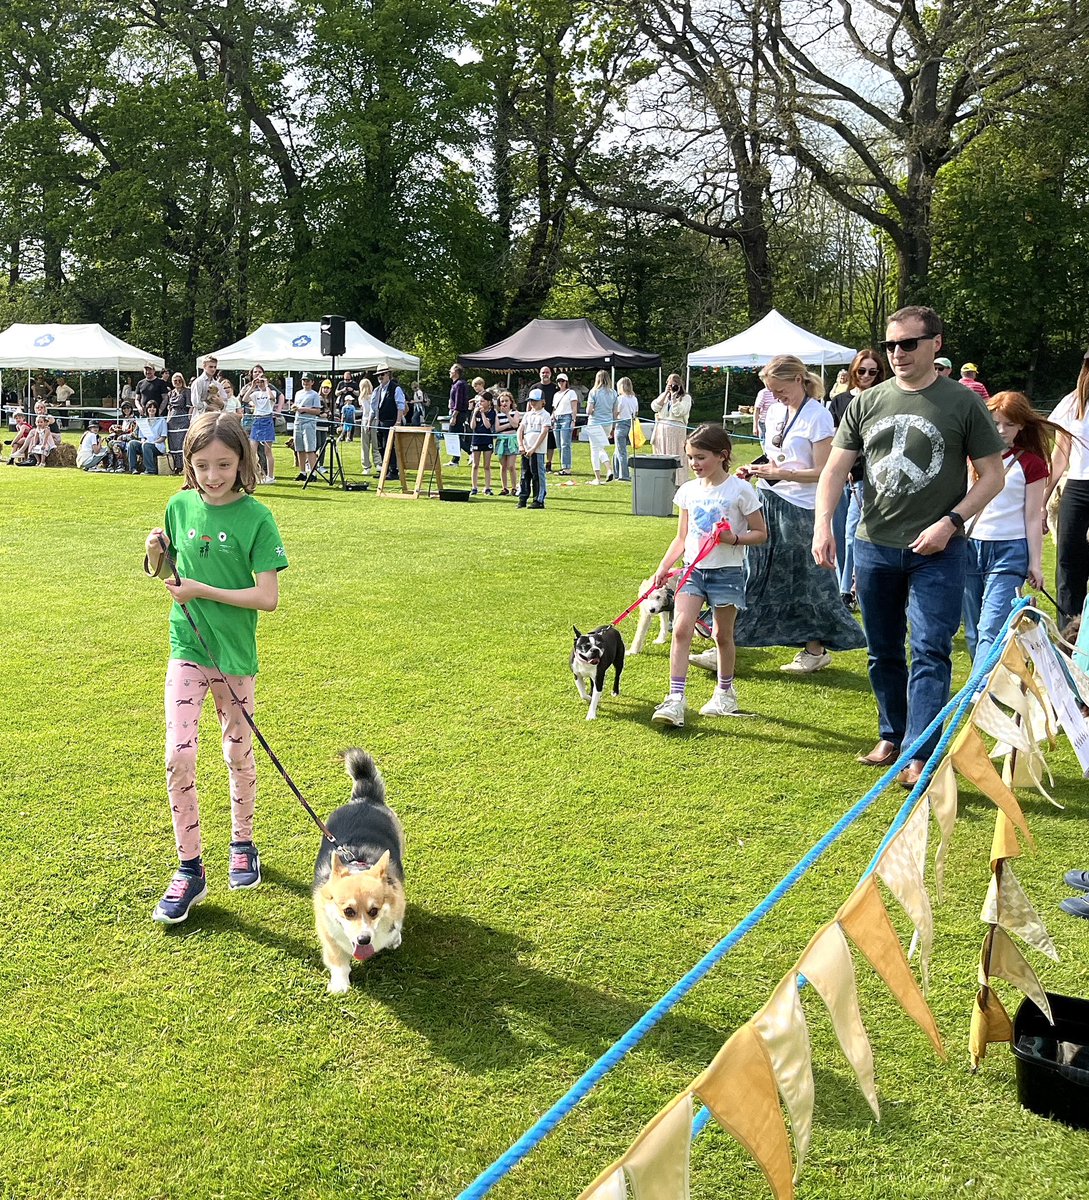 A huge thank you to the FoBP, Friends of Bedales Prep for the brilliant 'Barking, Bats and Balls' event - Cricket, Fete and Dog Show all in one glorious afternoon!

#schoolfete #thebedalesdifference #bedaleschool #petersfieldpulse #hampshire #independent #Bedalesprep